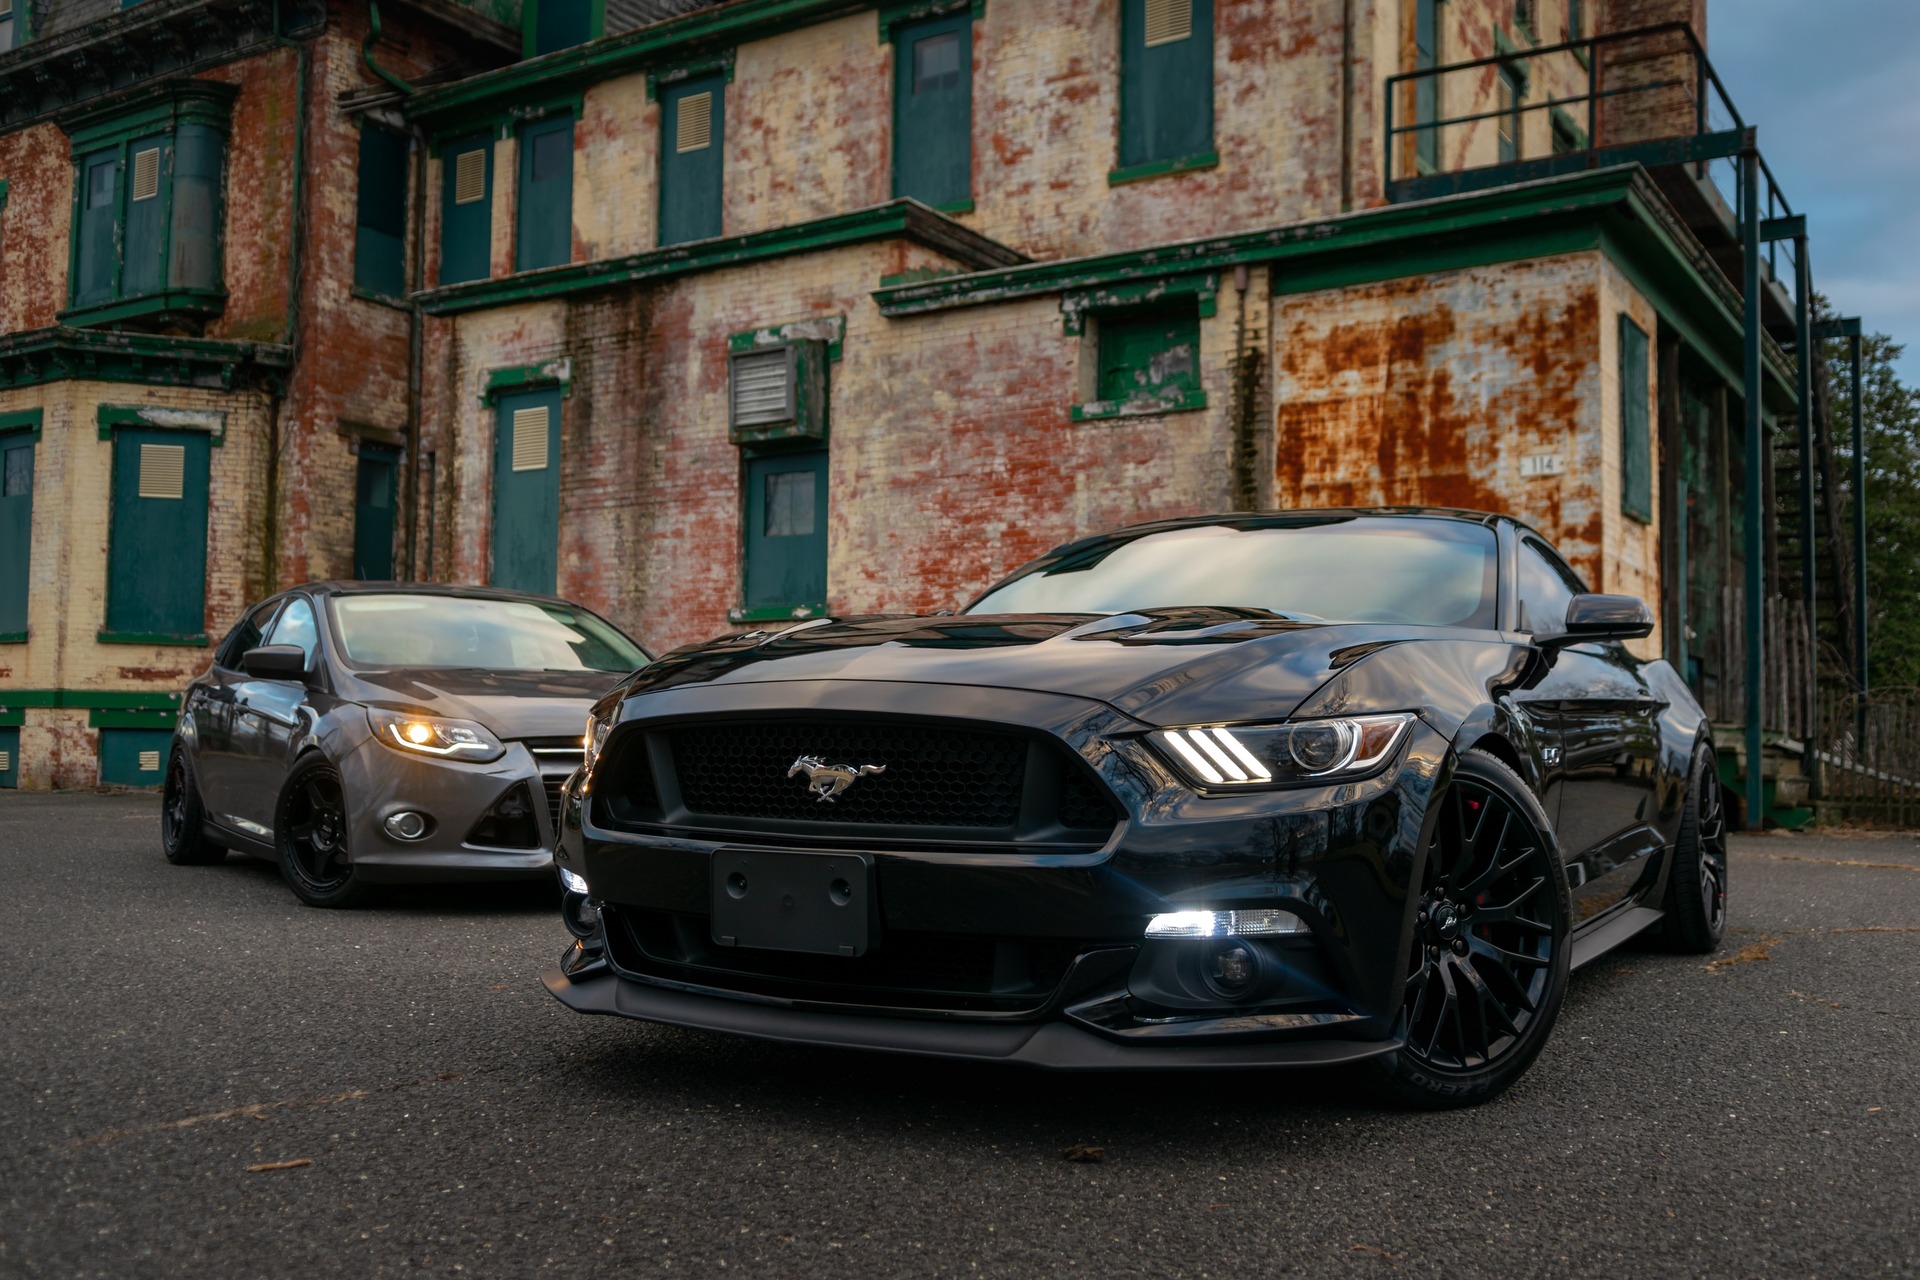 A ground level view of two Ford Mustangs